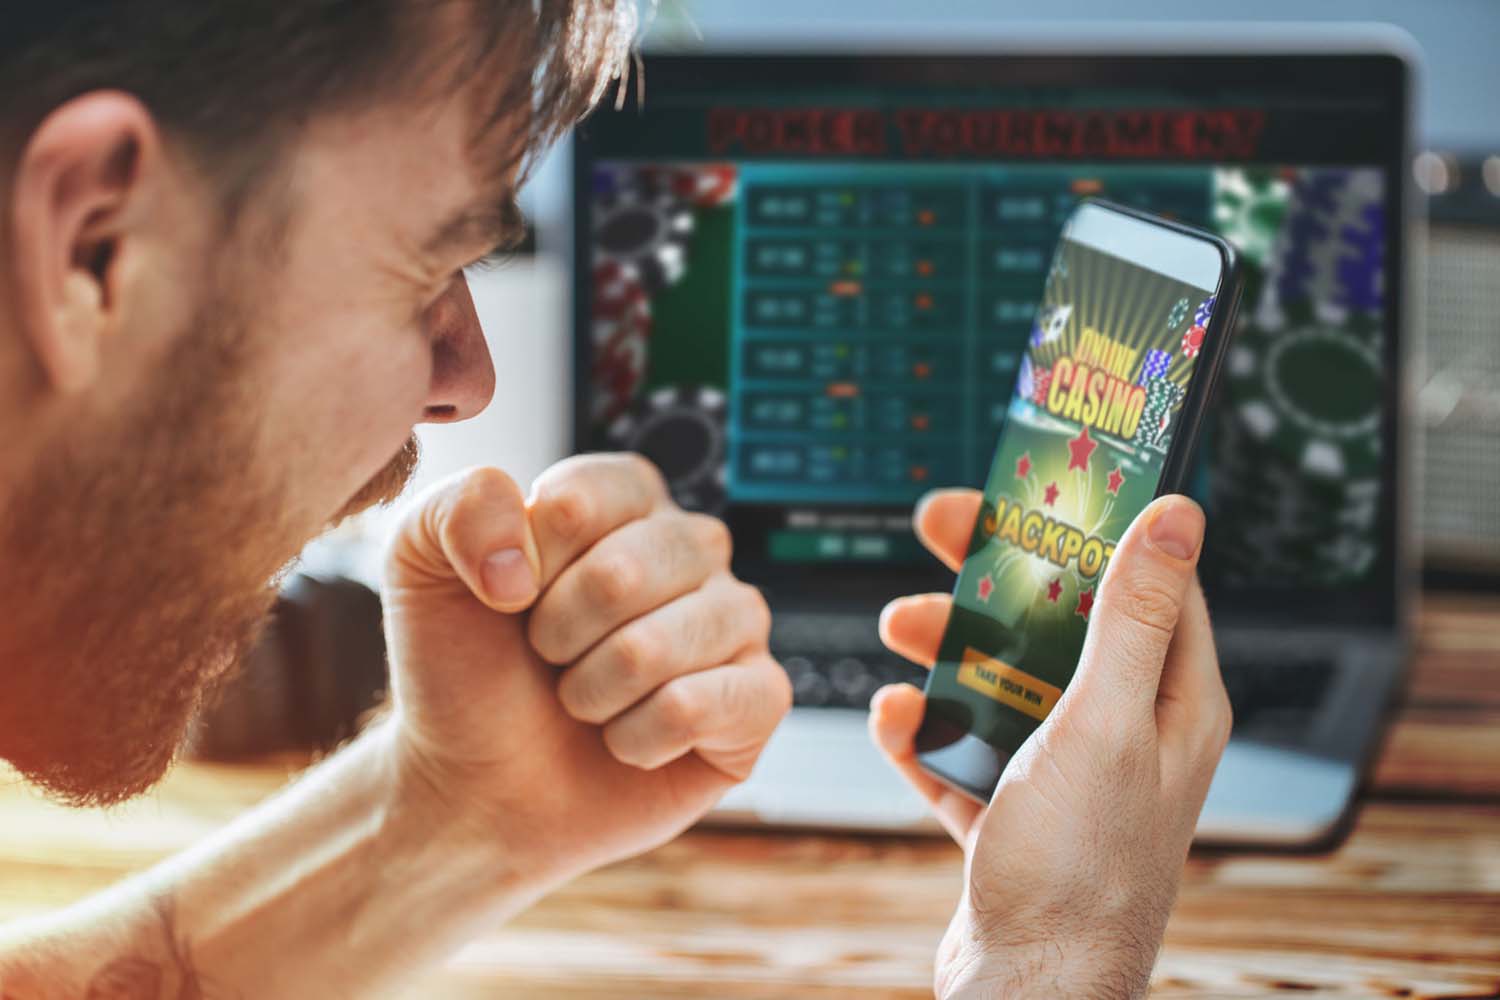 crypto wallet is always have slots catalogs and passion for mobile casino industry average return